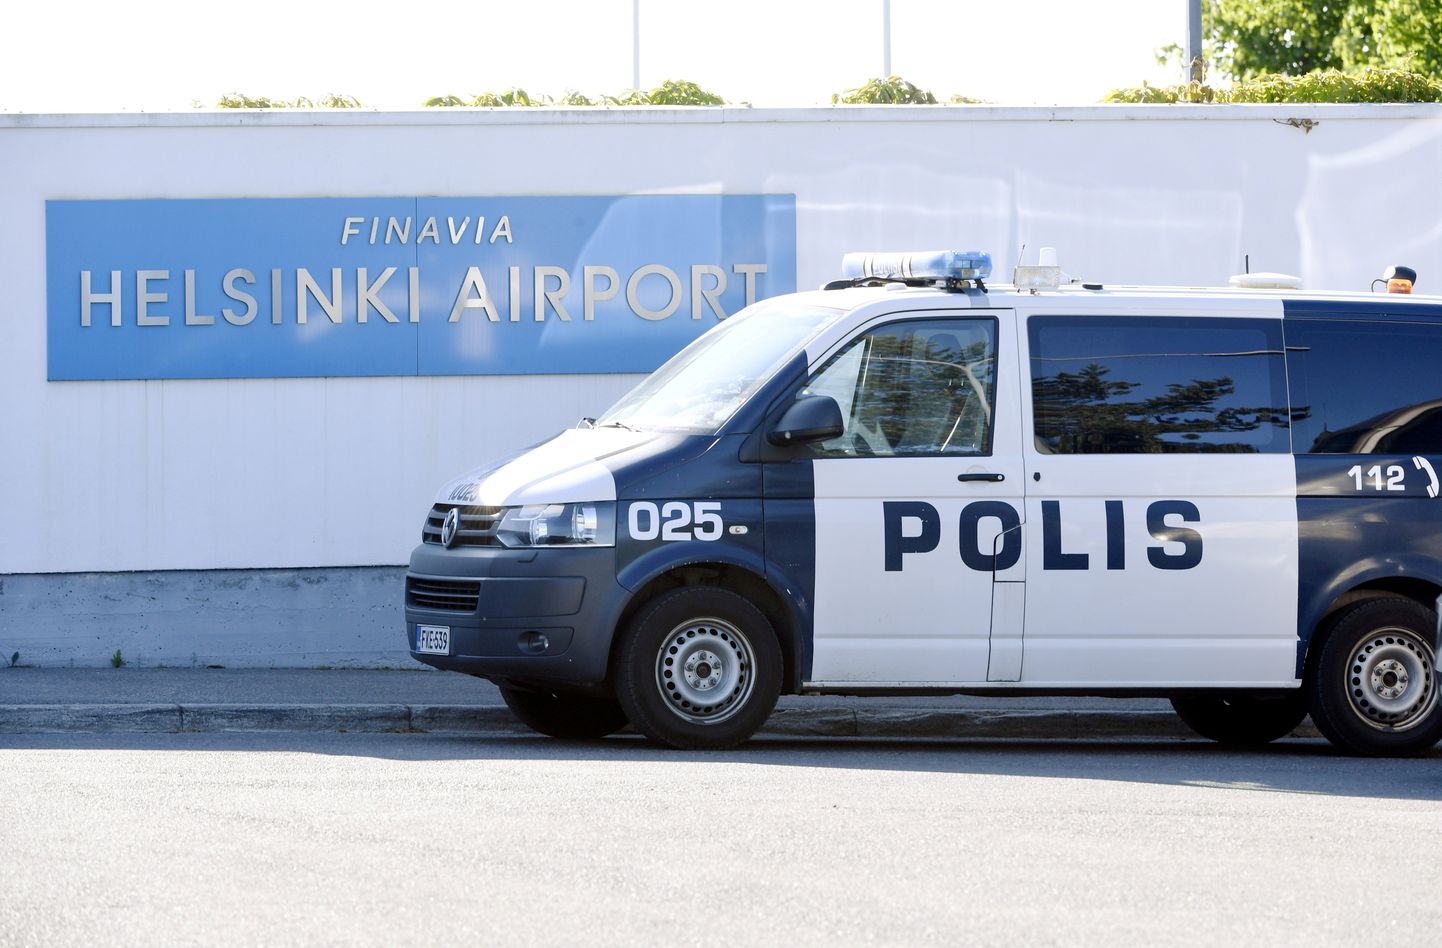 A police vehicle is parked in front of the Helsinki-Vantaa Airport's Business Flights Terminal, as Finland hosts a meeting of top officials from the U.S. and Russian armed forces, in Helsinki, Finland June 8, 2018.     Lehtikuva /Heikki Saukkomaa/via REUTERS. ATTENTION EDITORS - THIS IMAGE HAS BEEN SUPPLIED BY A THIRD PARTY. FINLAND OUT.